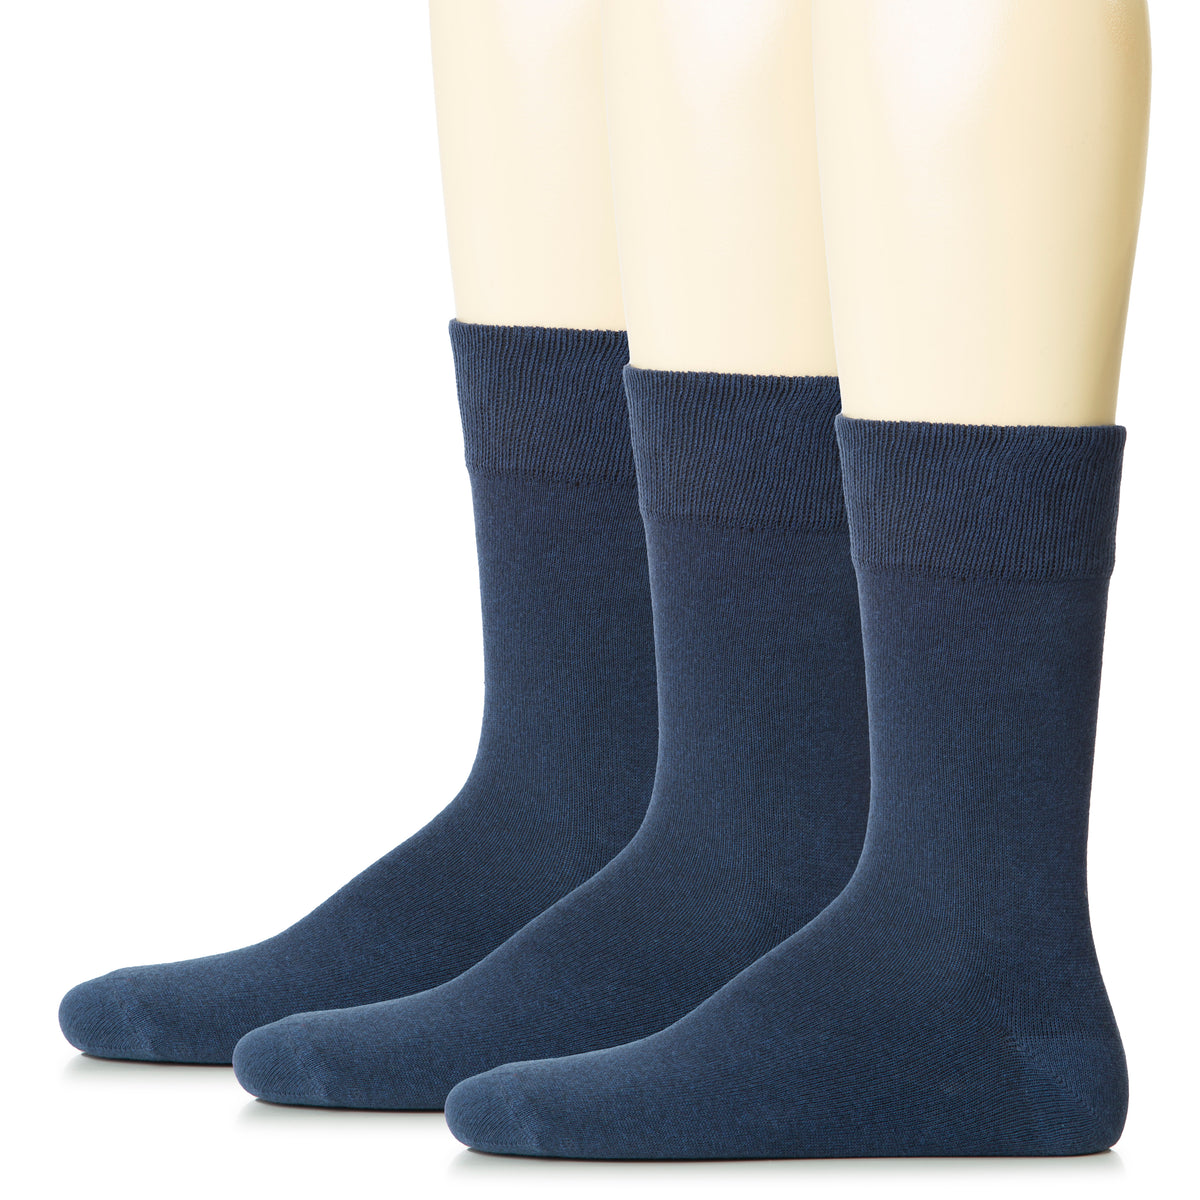 Take your sock game to the next level with these three blue cotton crew socks designed for both style and comfort.